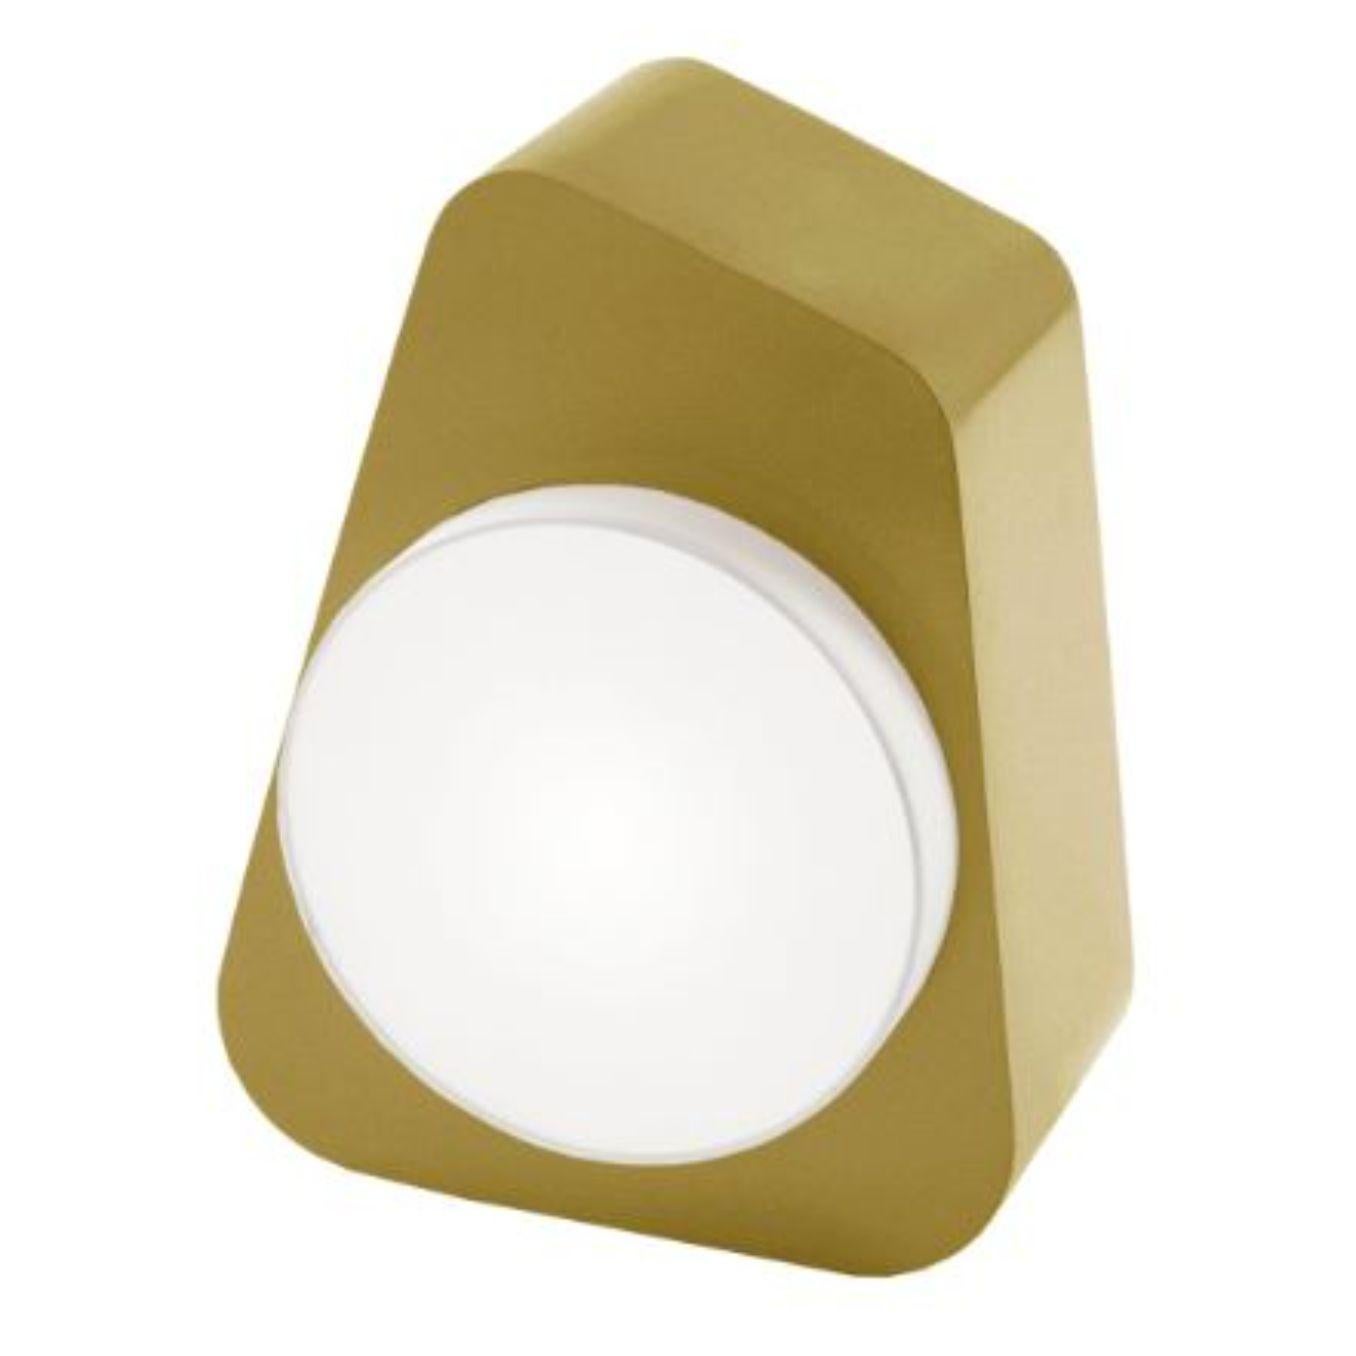 Gold Carousel wall lamp by Dooq
Dimensions: W 30 x D 18 x H 40 cm
Materials: lacquered metal
abat-jour: cotton
Also available in different colours and materials.

Information:
230V/50Hz
E27/1x25W LED
120V/60Hz
E26/1x10W LED
bulb not included

All